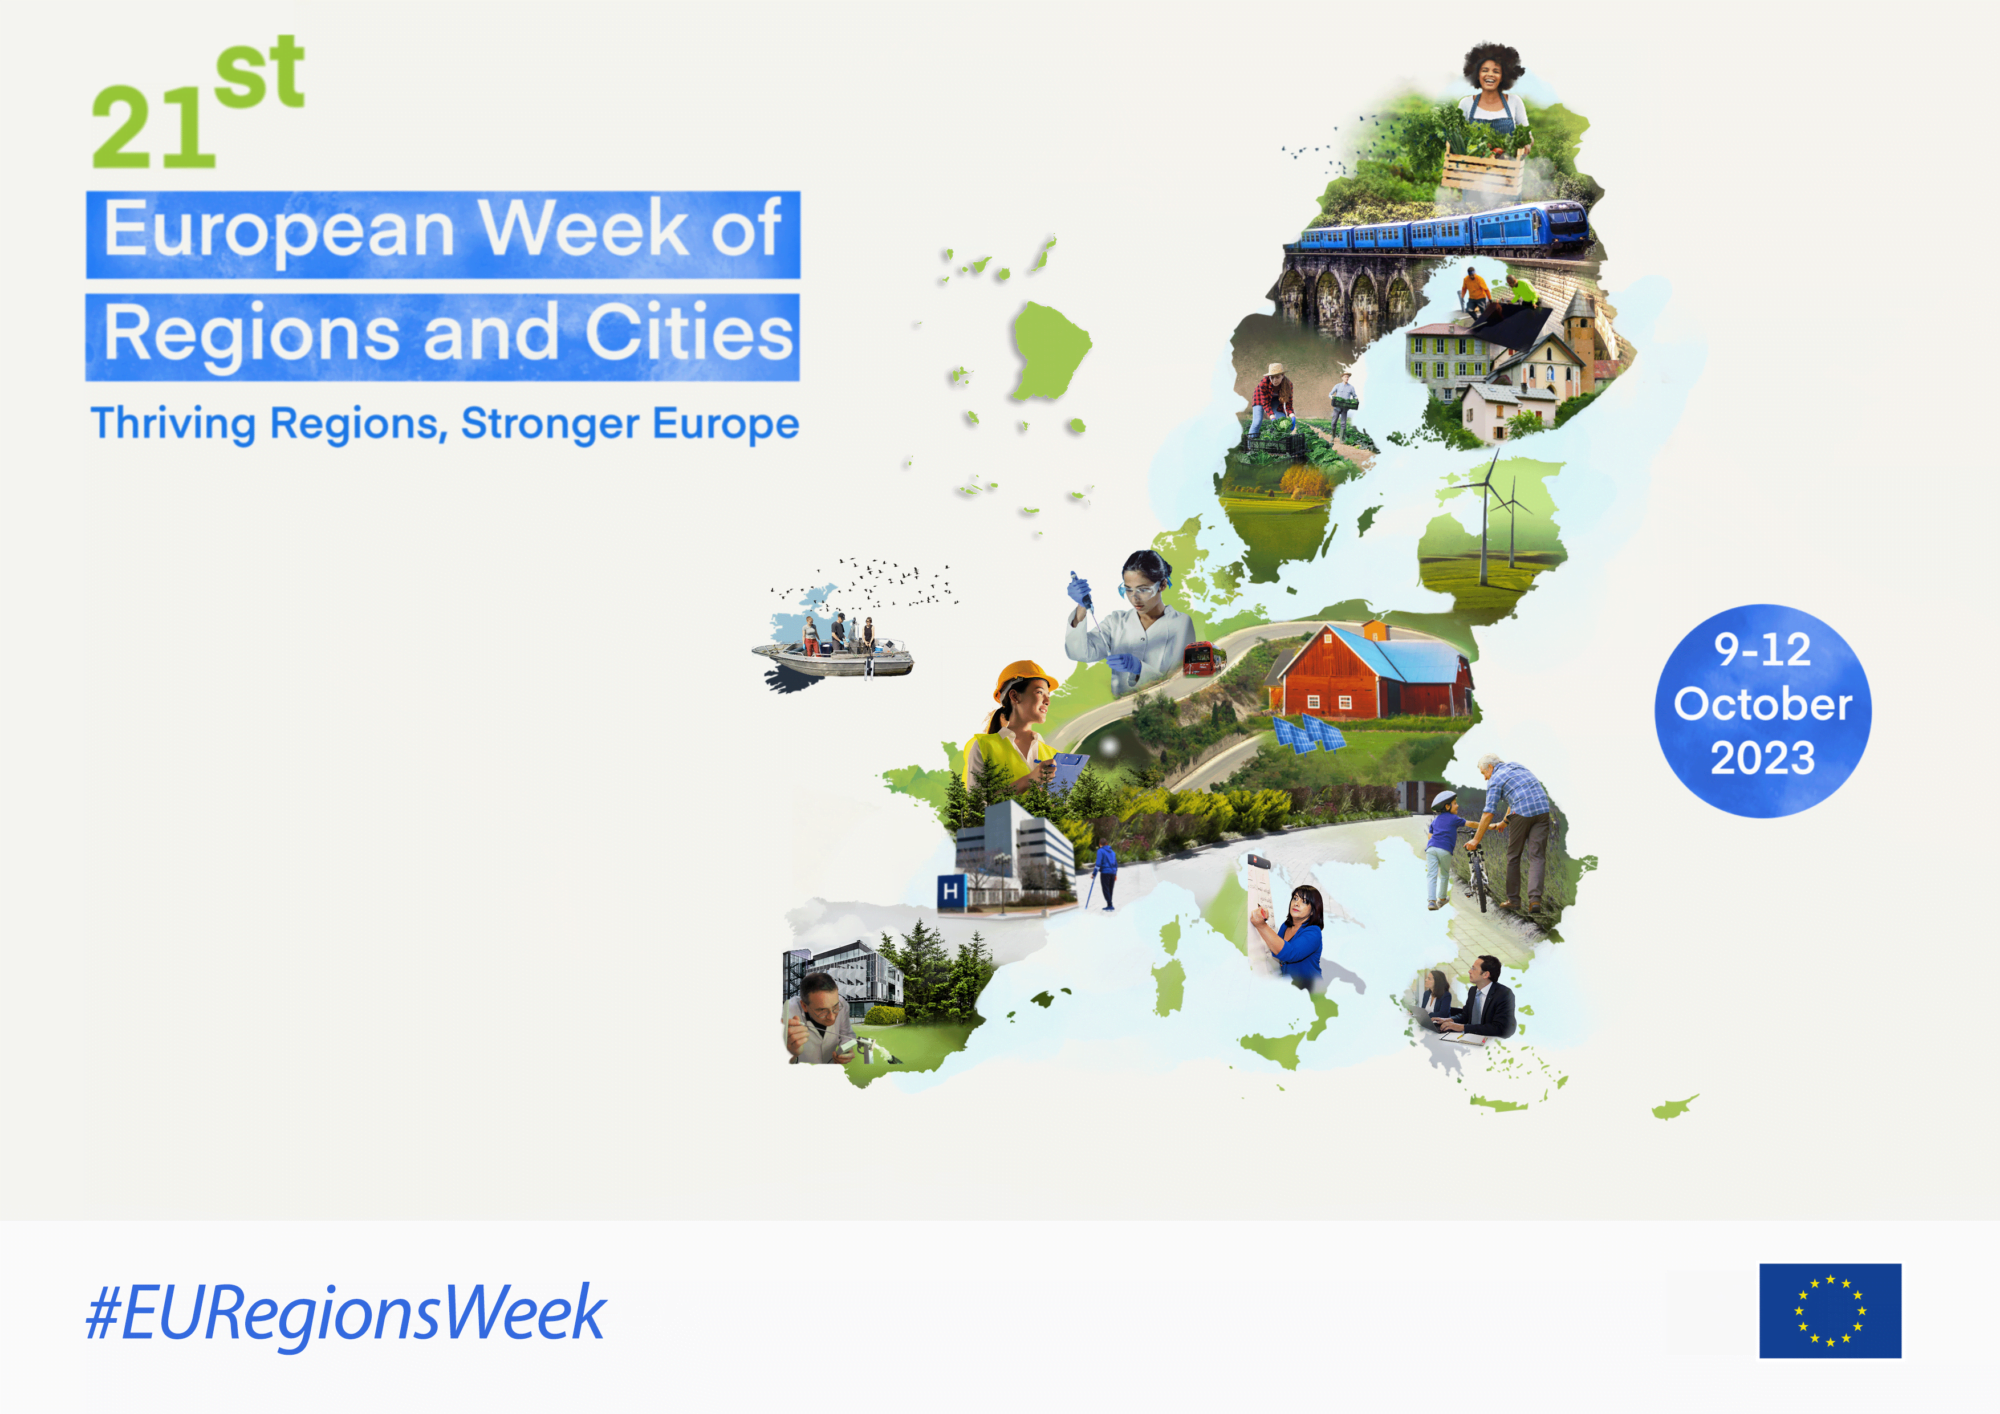 POLIS talks mobility at the European Week of Regions and Cities 2023